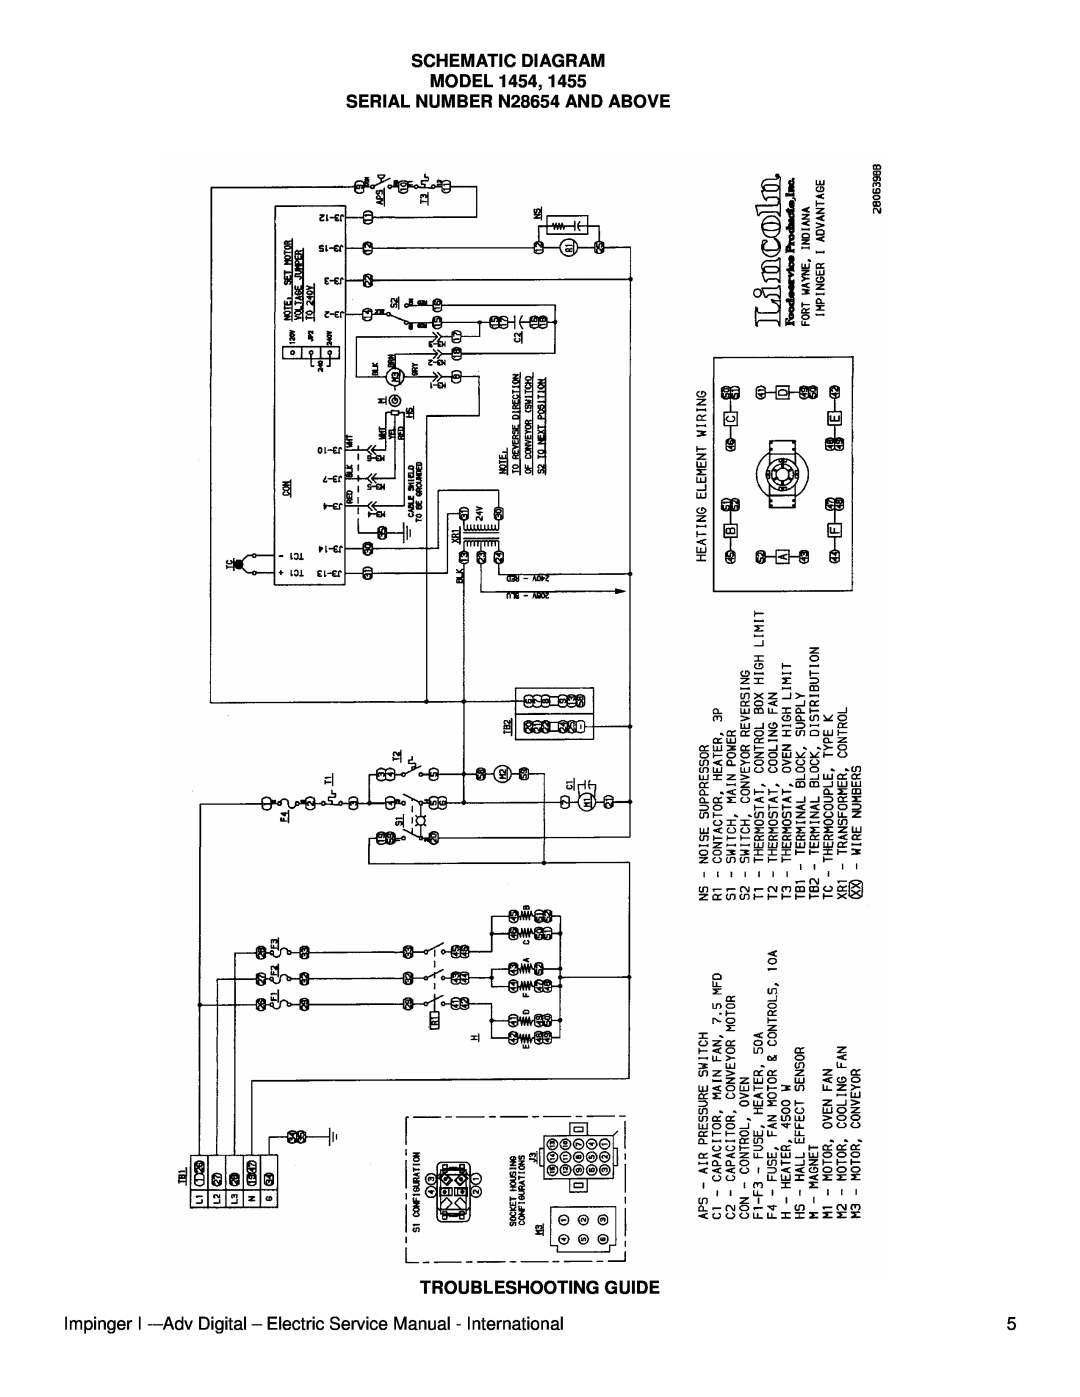 Lincoln 1454-000-E, 1455-000-E SCHEMATIC DIAGRAM MODEL 1454, SERIAL NUMBER N28654 AND ABOVE, Troubleshooting Guide 